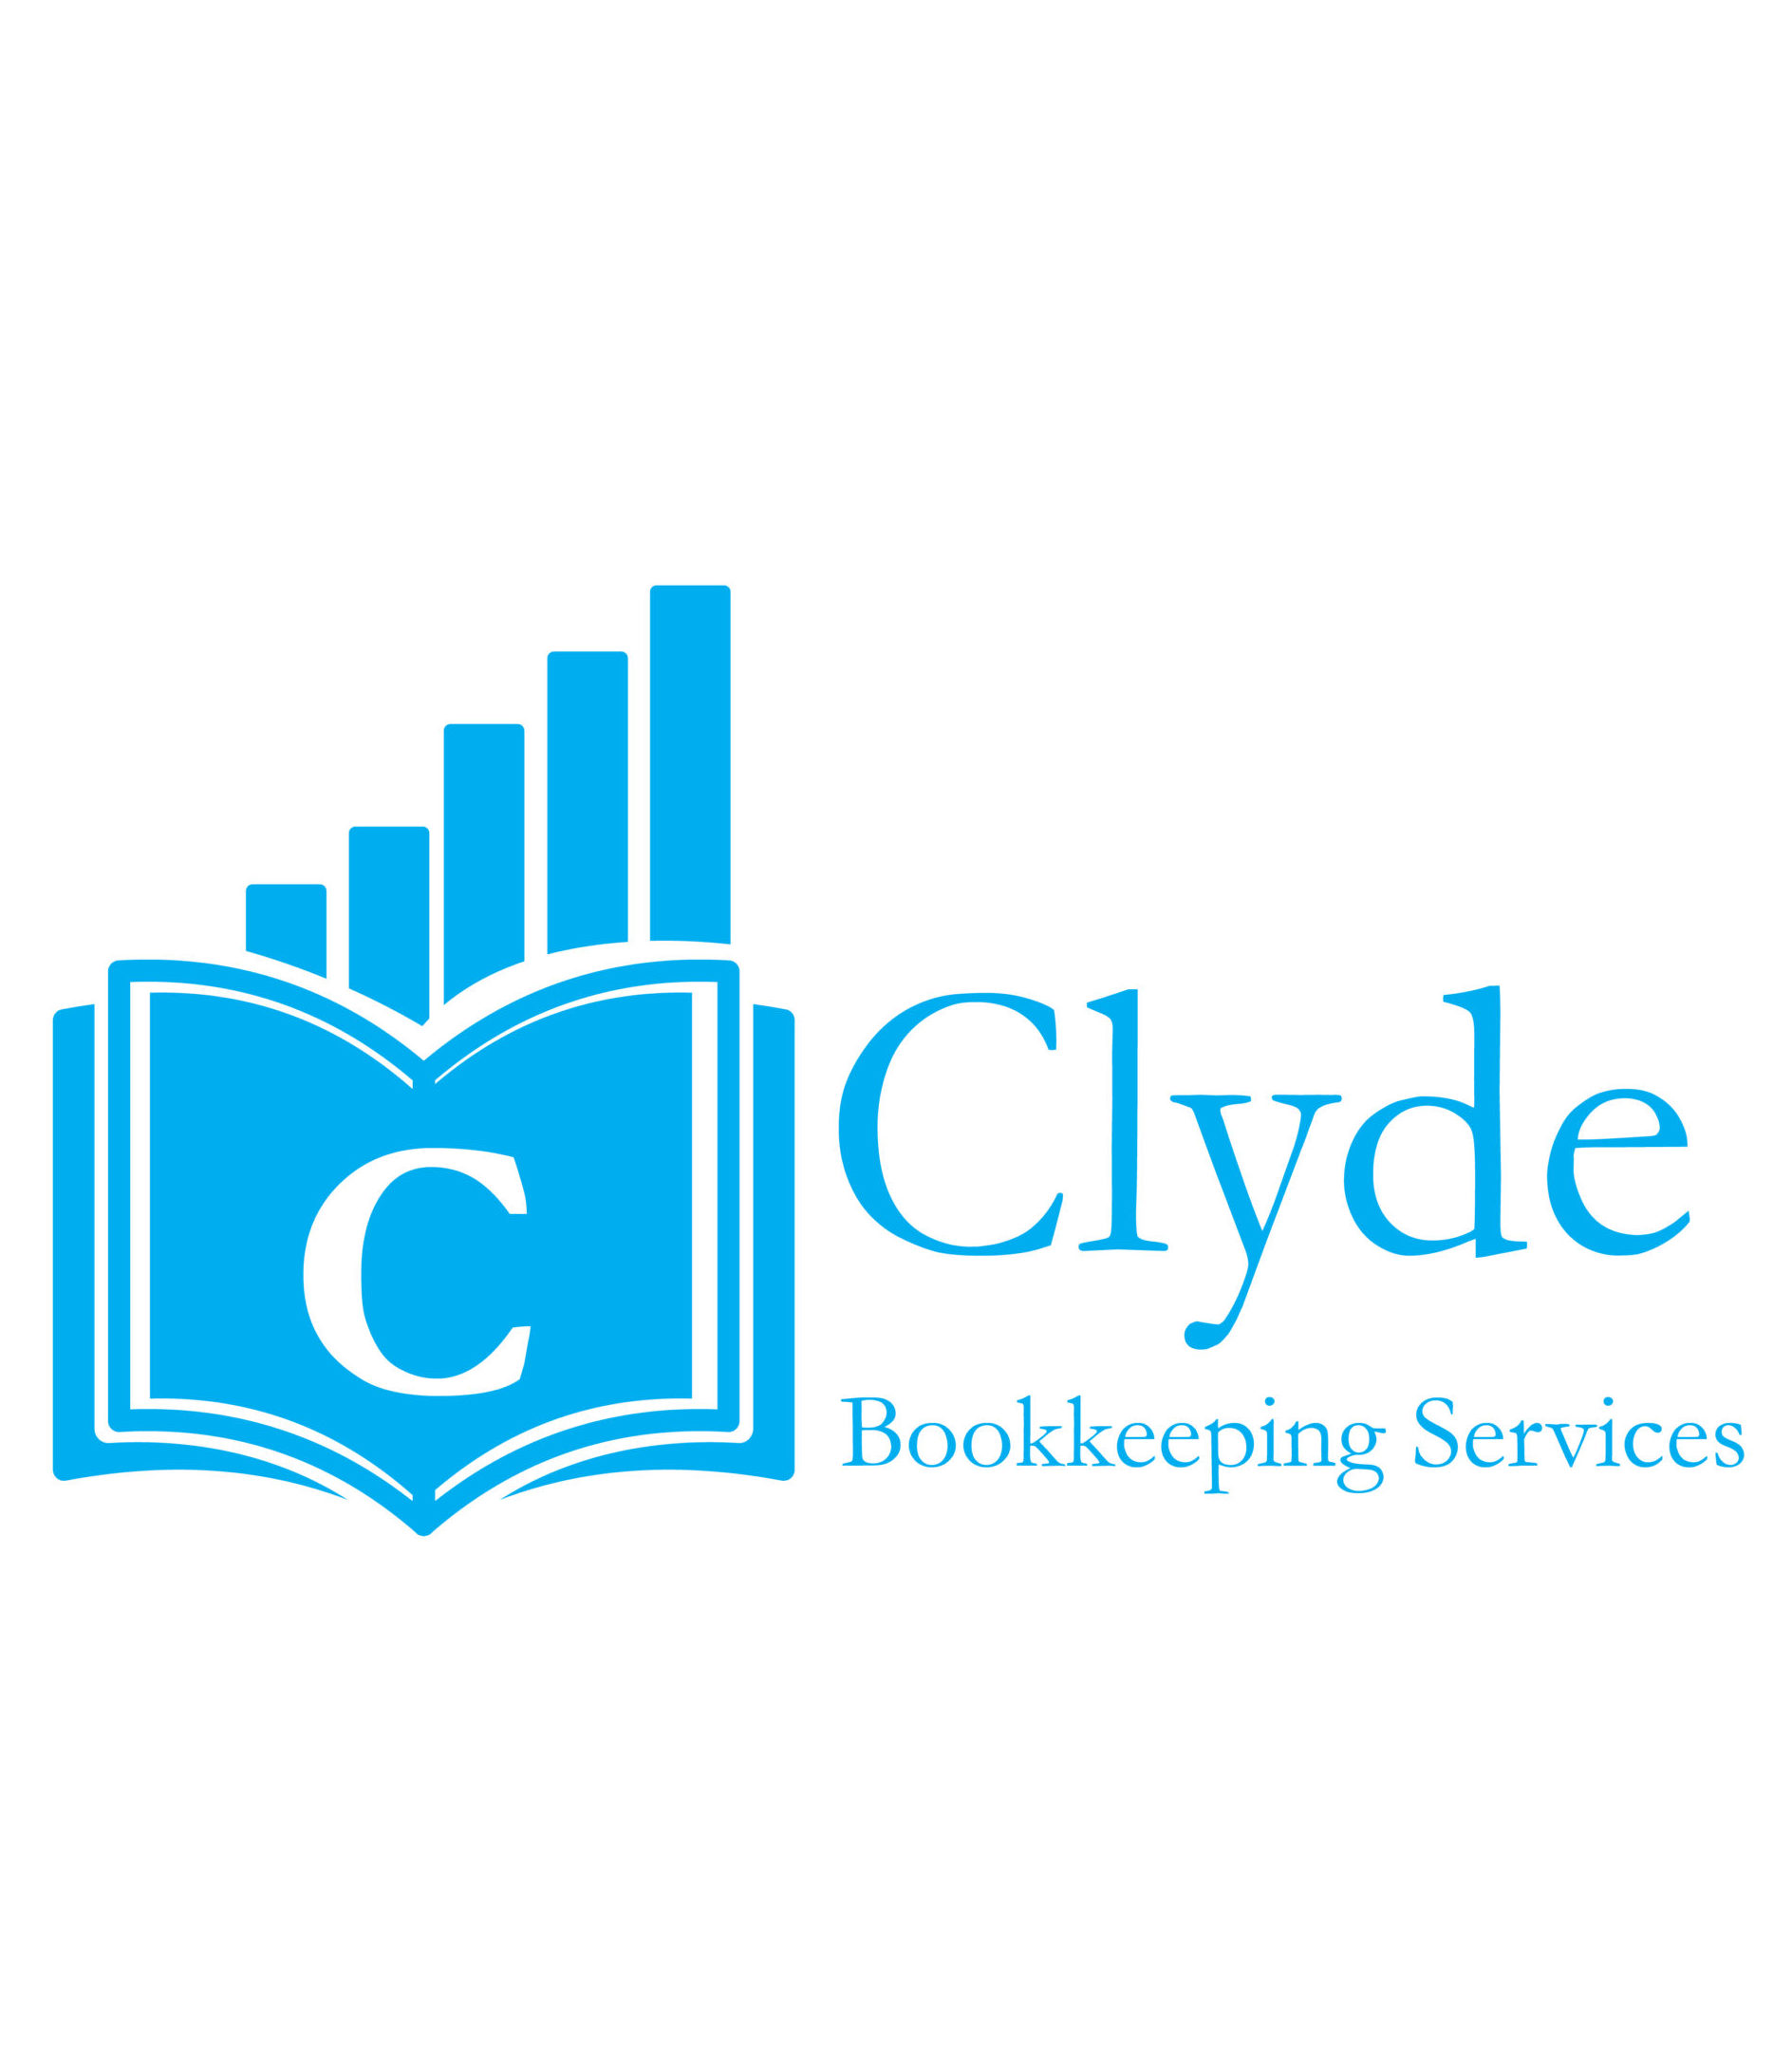 Clyde Bookkeeping Services - One-Stop Back Office Solution Provider